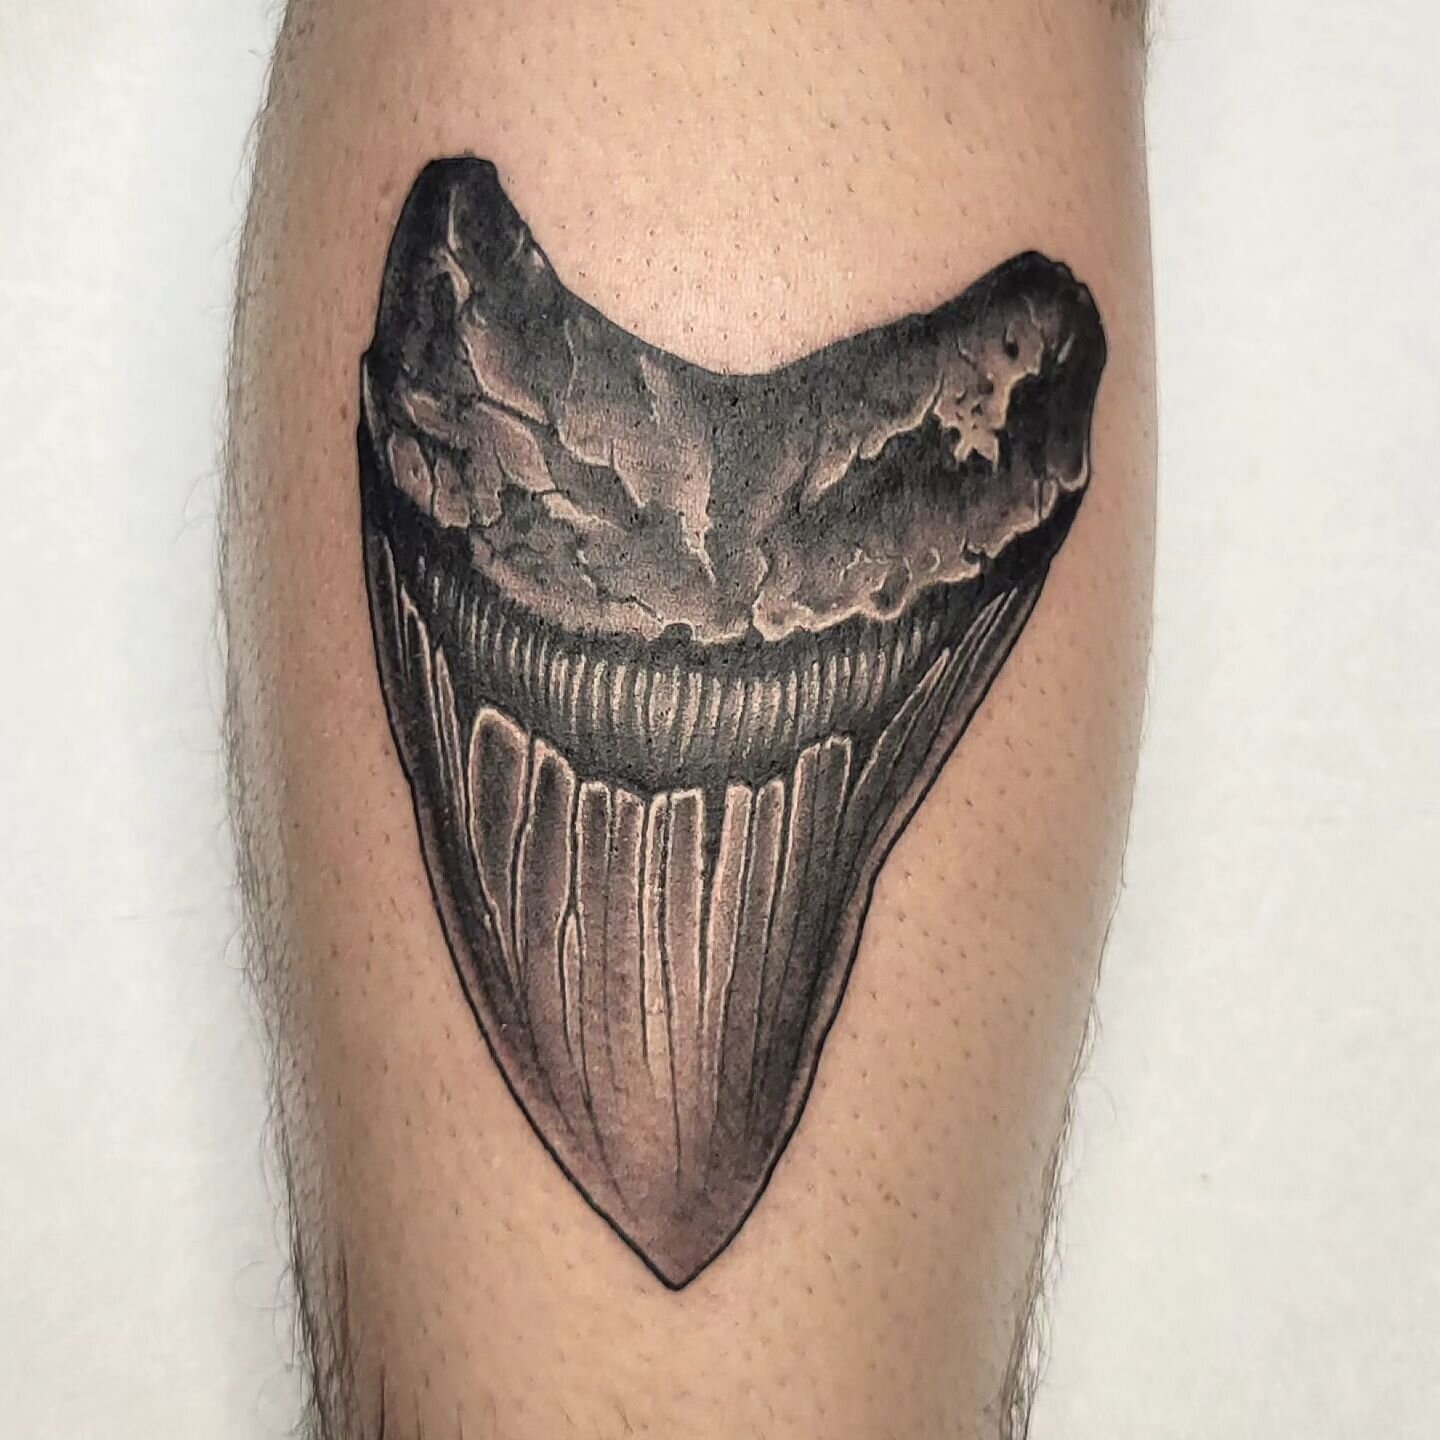 Thanks @tstewart_23 for sitting like a champ today and rocking this one out. More like this please!

#pleasureislandtattoo #coreyhardisontattoos #industryinks @industryinks #kingpintattoosupply @kingpintattoosupply #megalodontooth 
#carolinabeach #wi